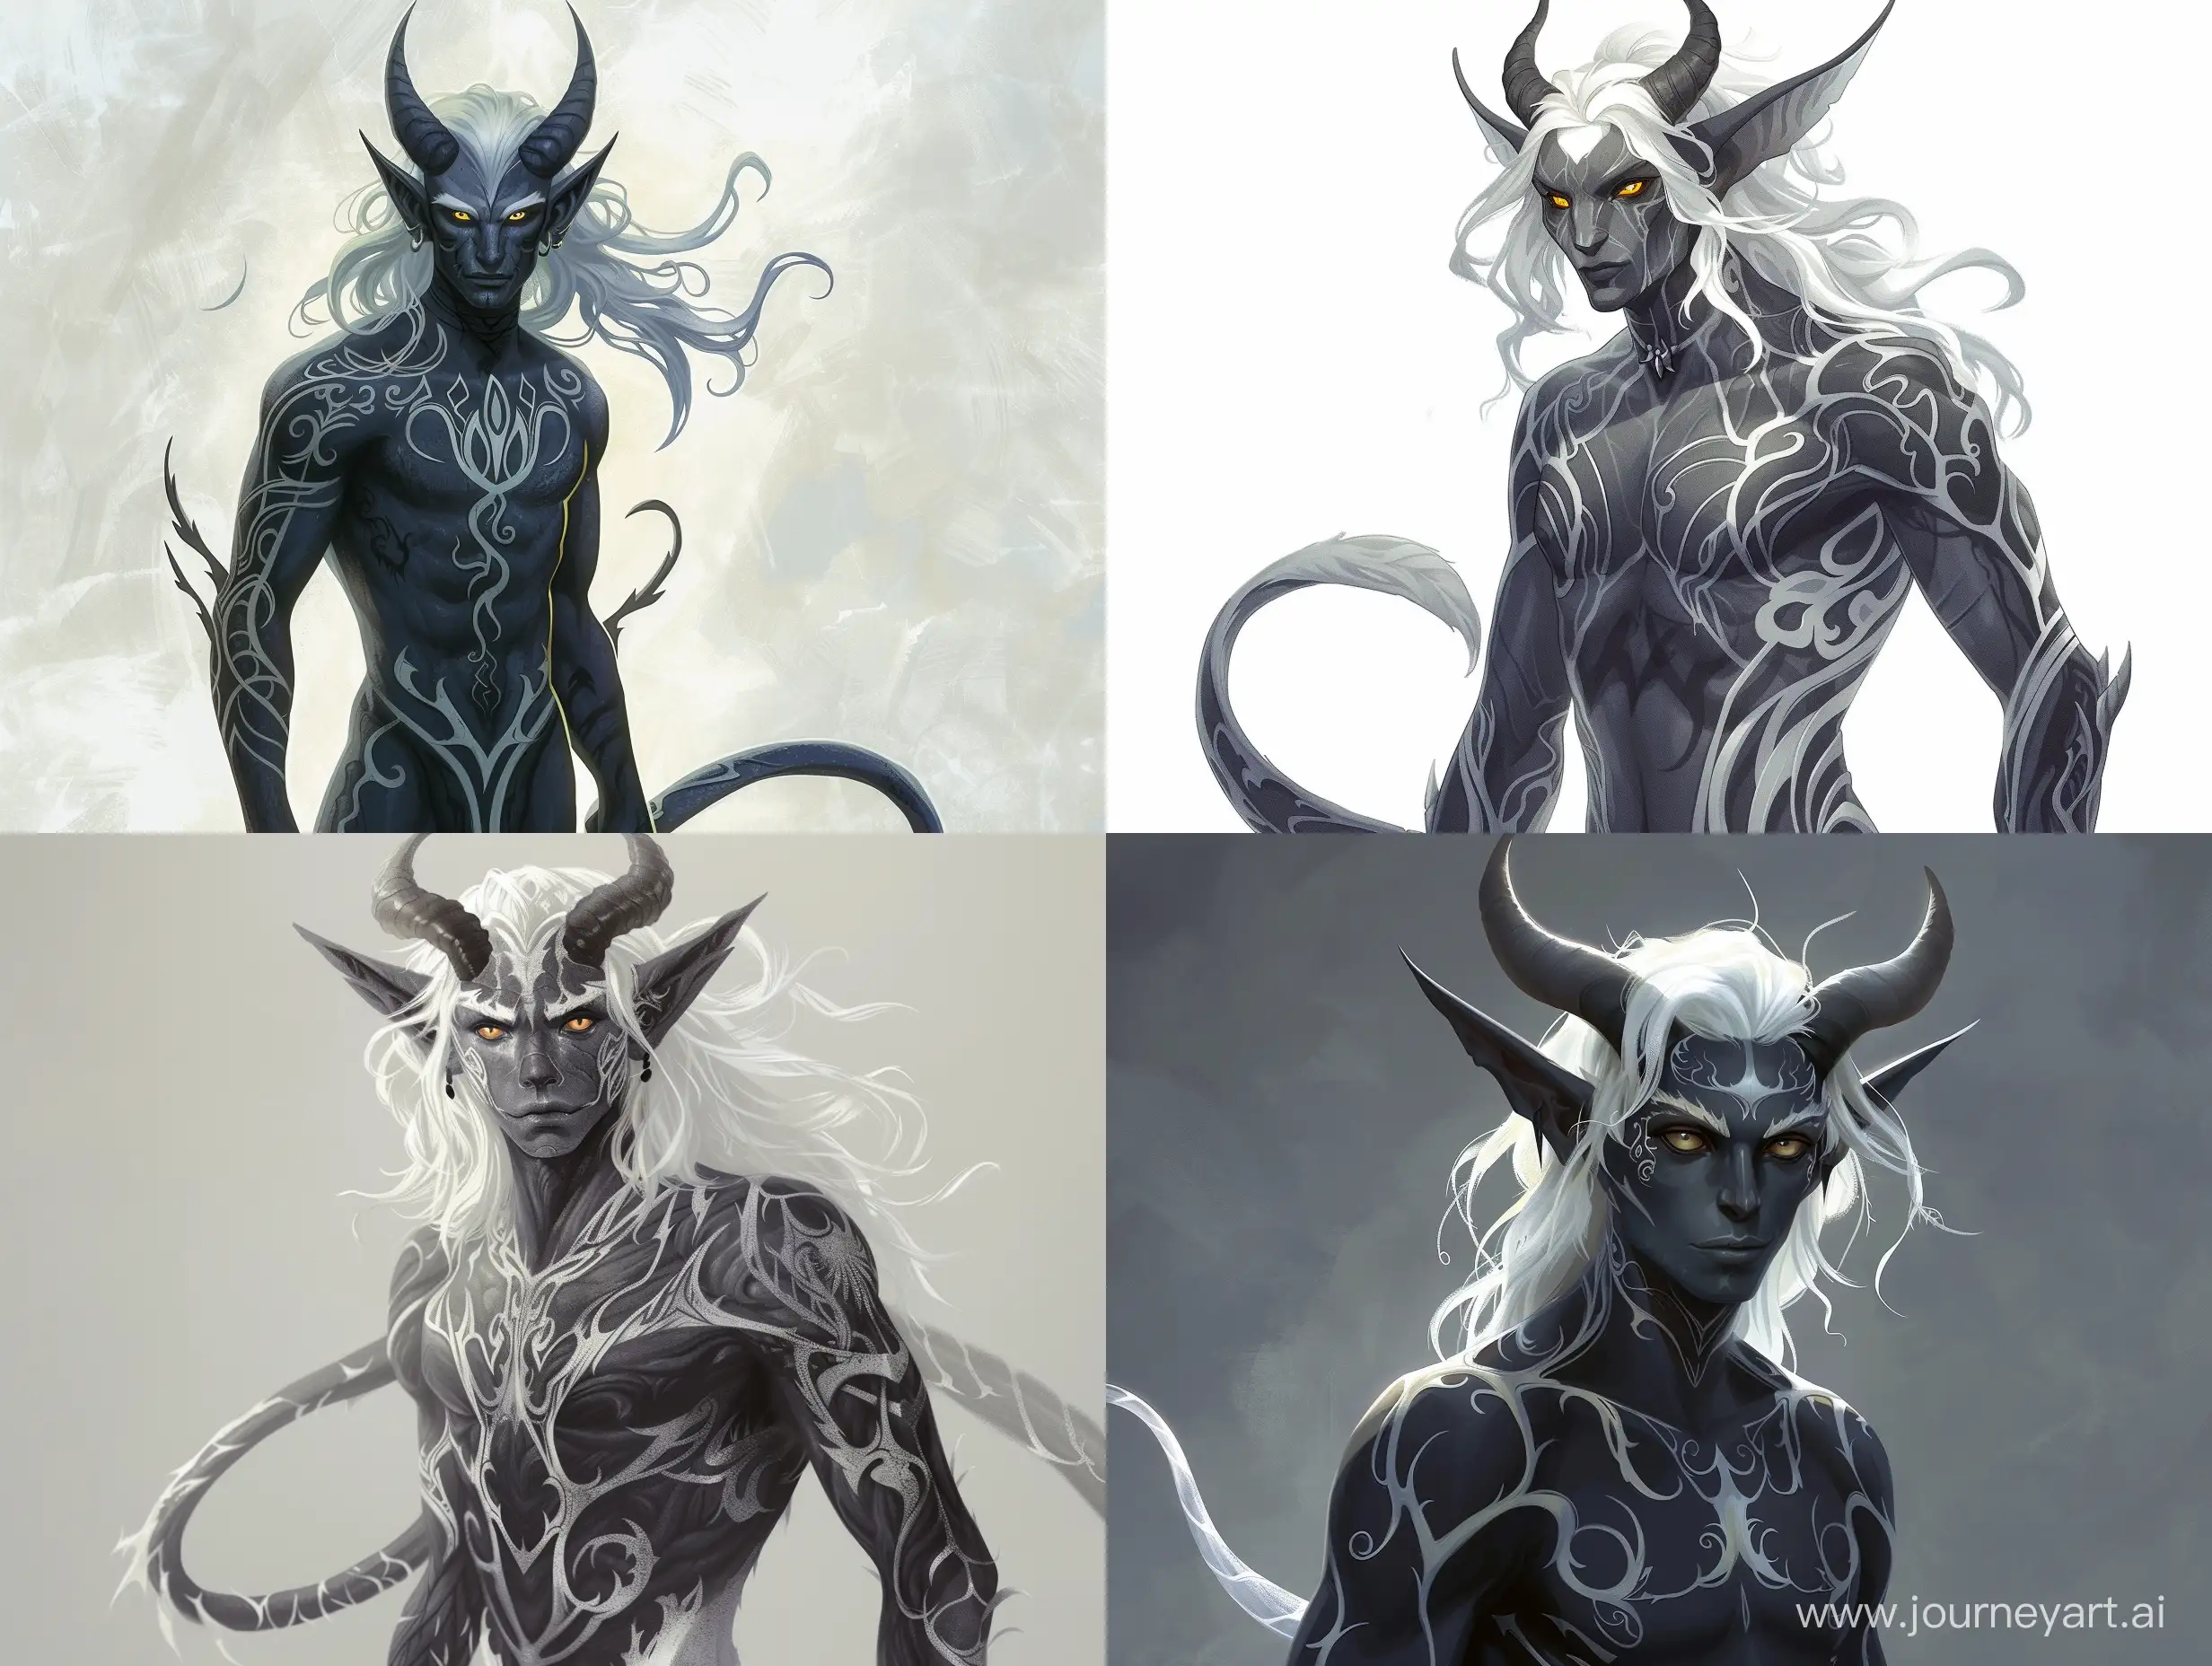 Male humanoid with dark grey skin and white intricate markings. Long ears, curvy smooth horns, bright yellow eyes with slitted pupils. White wavy shoulder-length hair. Slender androgynous body. Long tail. Hands and legs with claws.